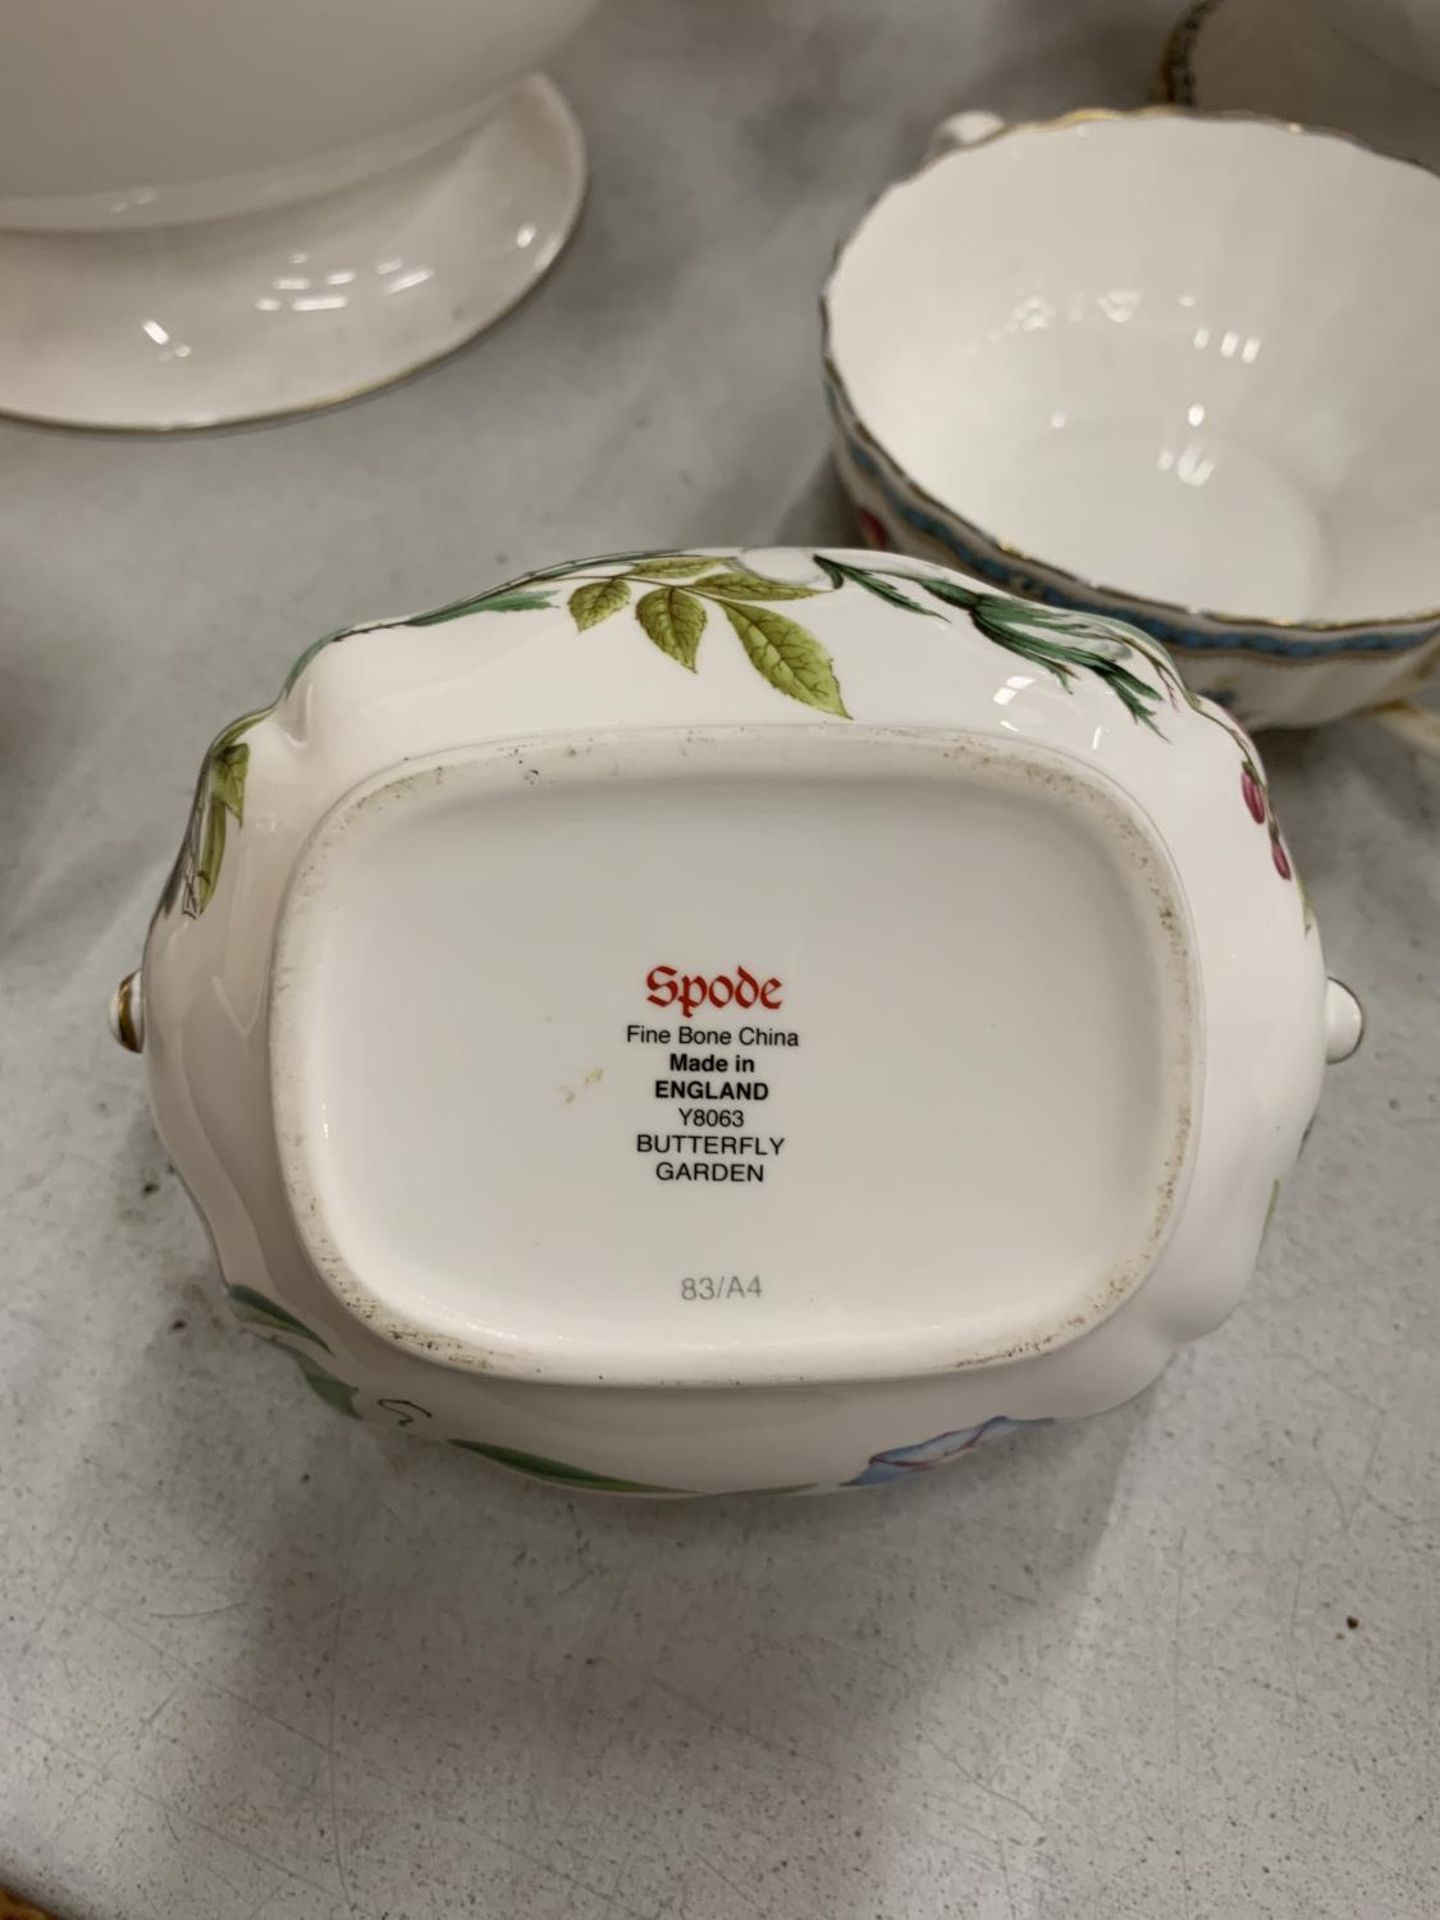 SIX PIECES OF SPODE TO INCLUDE THREE SERVING DISHES, A SOUP COUPE AND TWO SUGAR BOWLS - Bild 2 aus 3